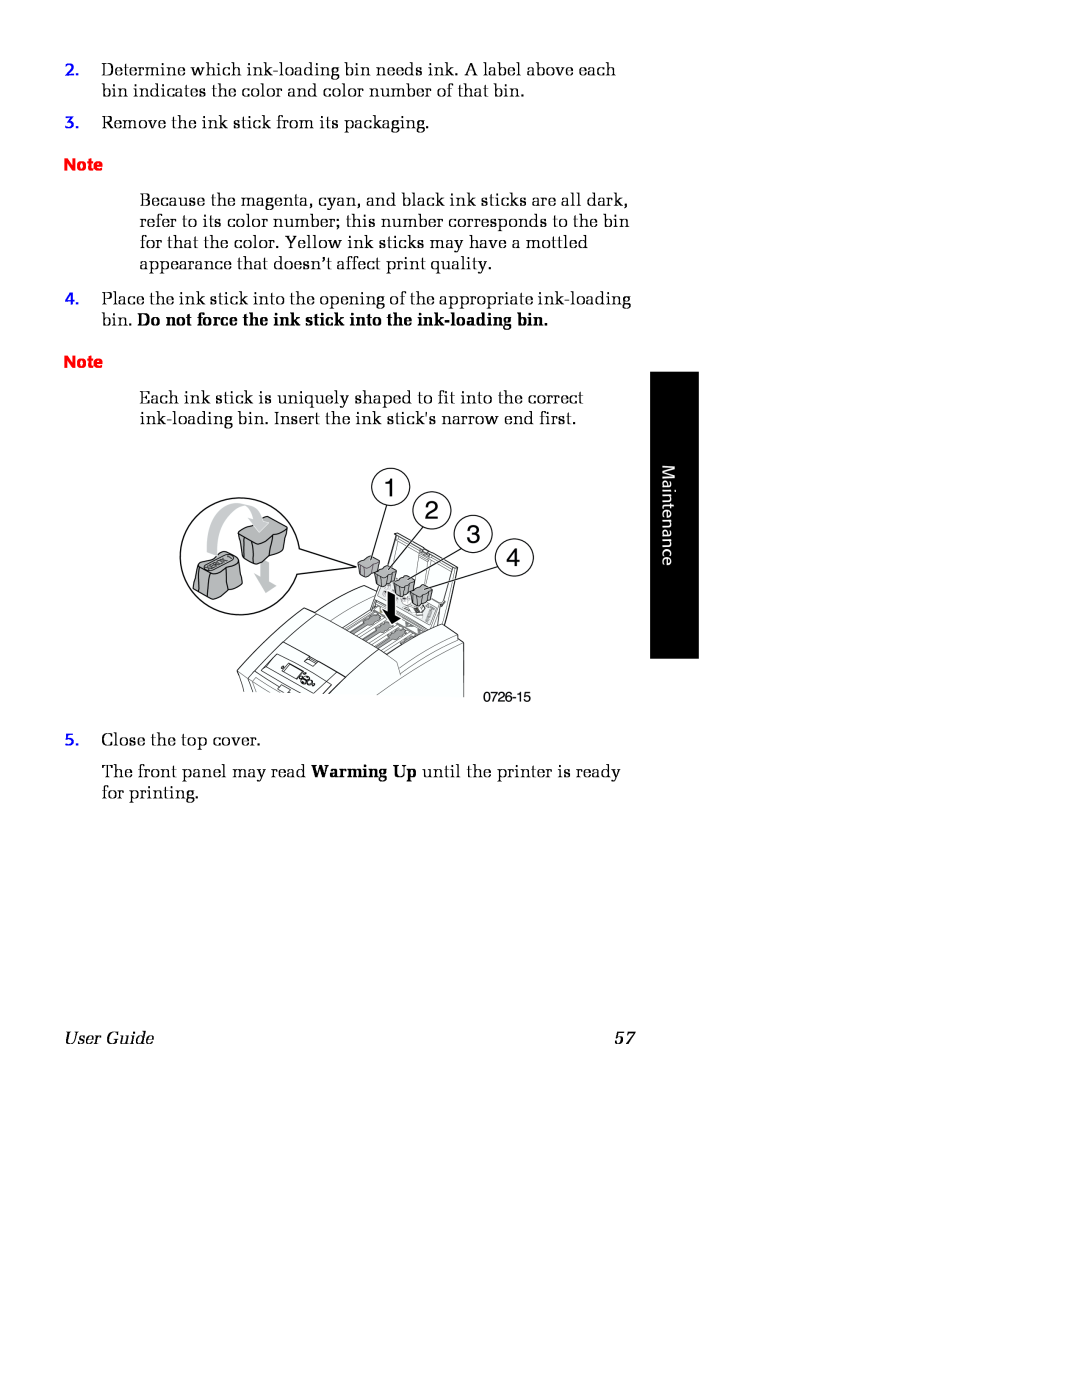 Xerox Phaser 860 manual Remove the ink stick from its packaging, Maintenance, User Guide 